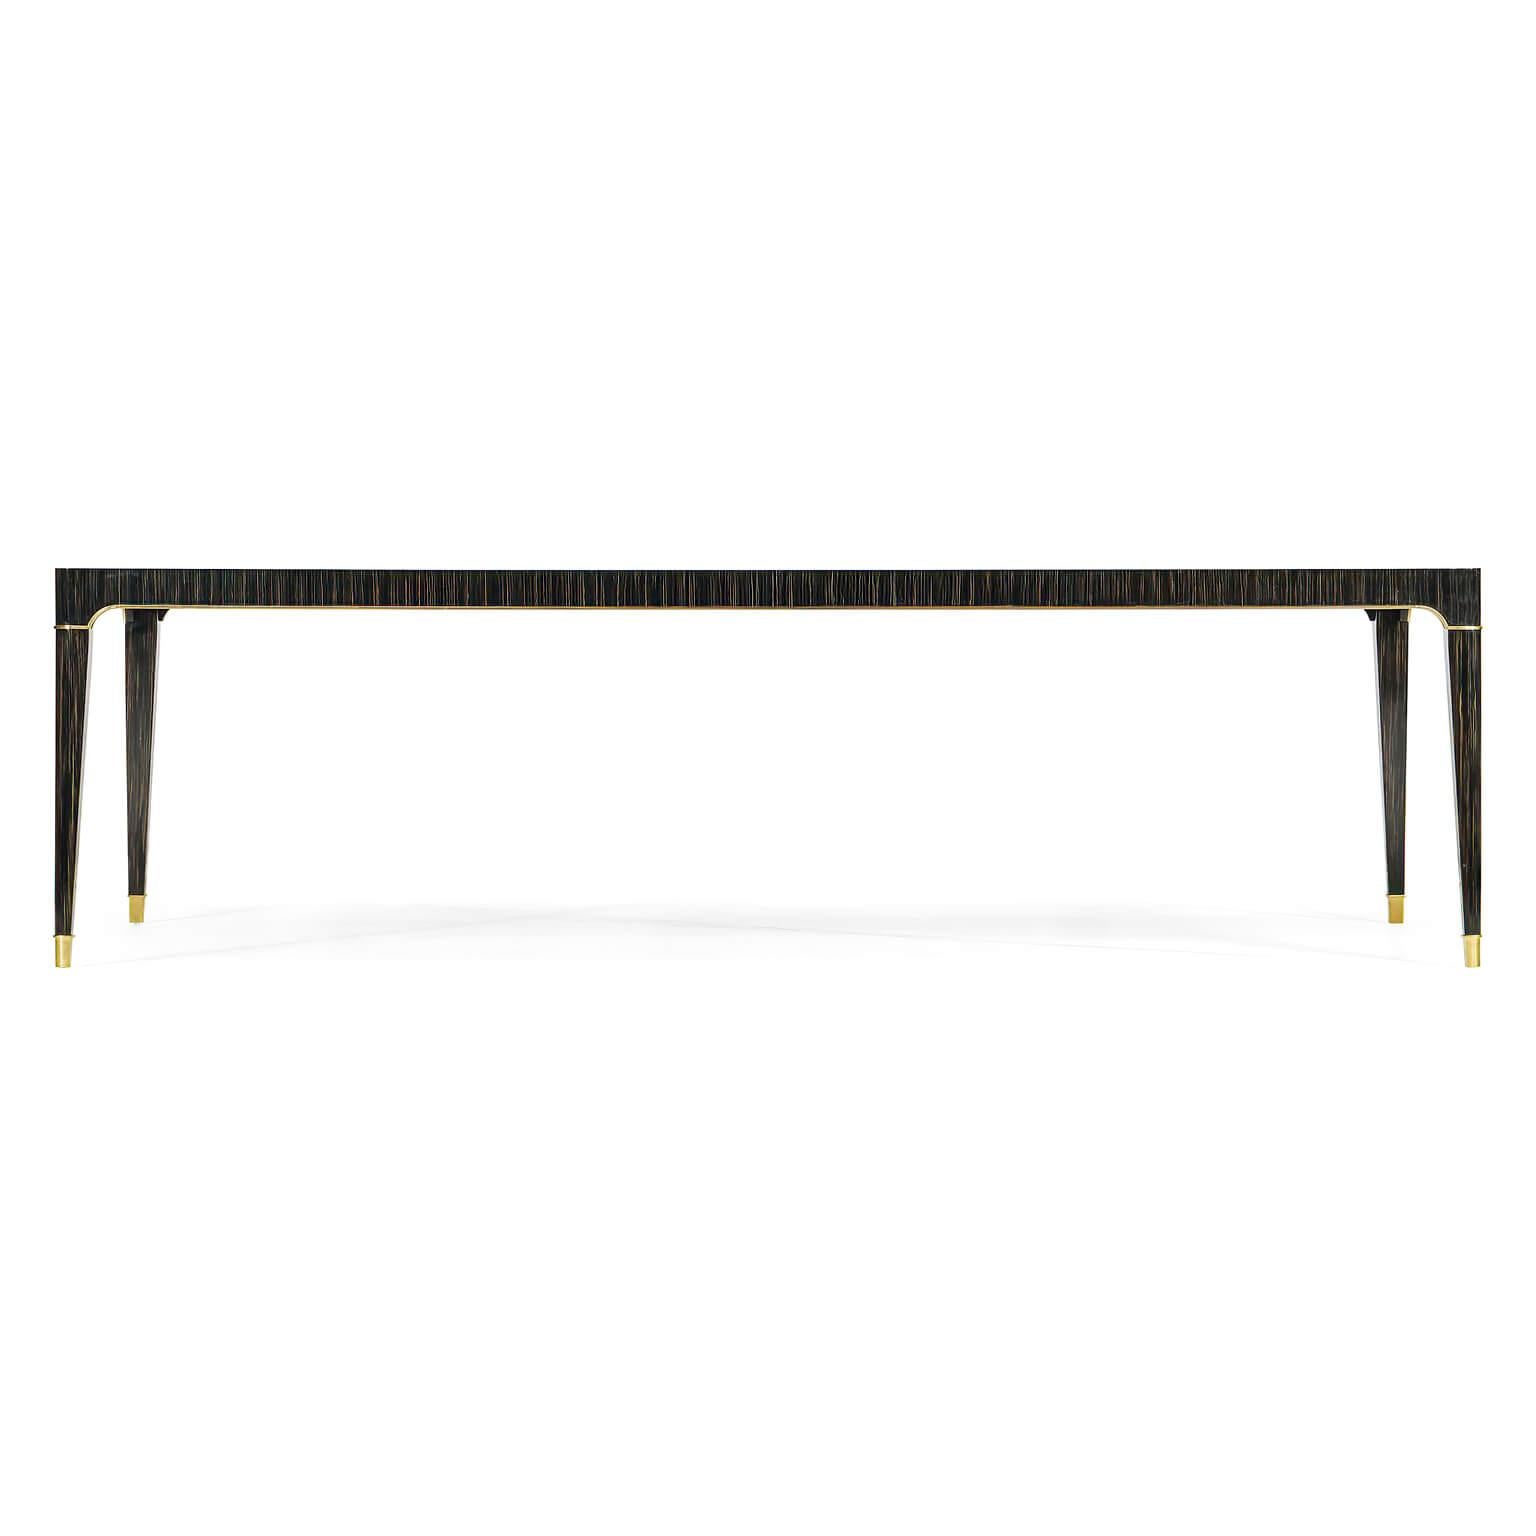 An elegant Mid-Century Modern style dining table that seats up to 10 people. With highly polished Macassar veneers, a satin brass inset center to the top, with brass trim to the apron and brass caps to the tapered legs. 

Dimensions: 108